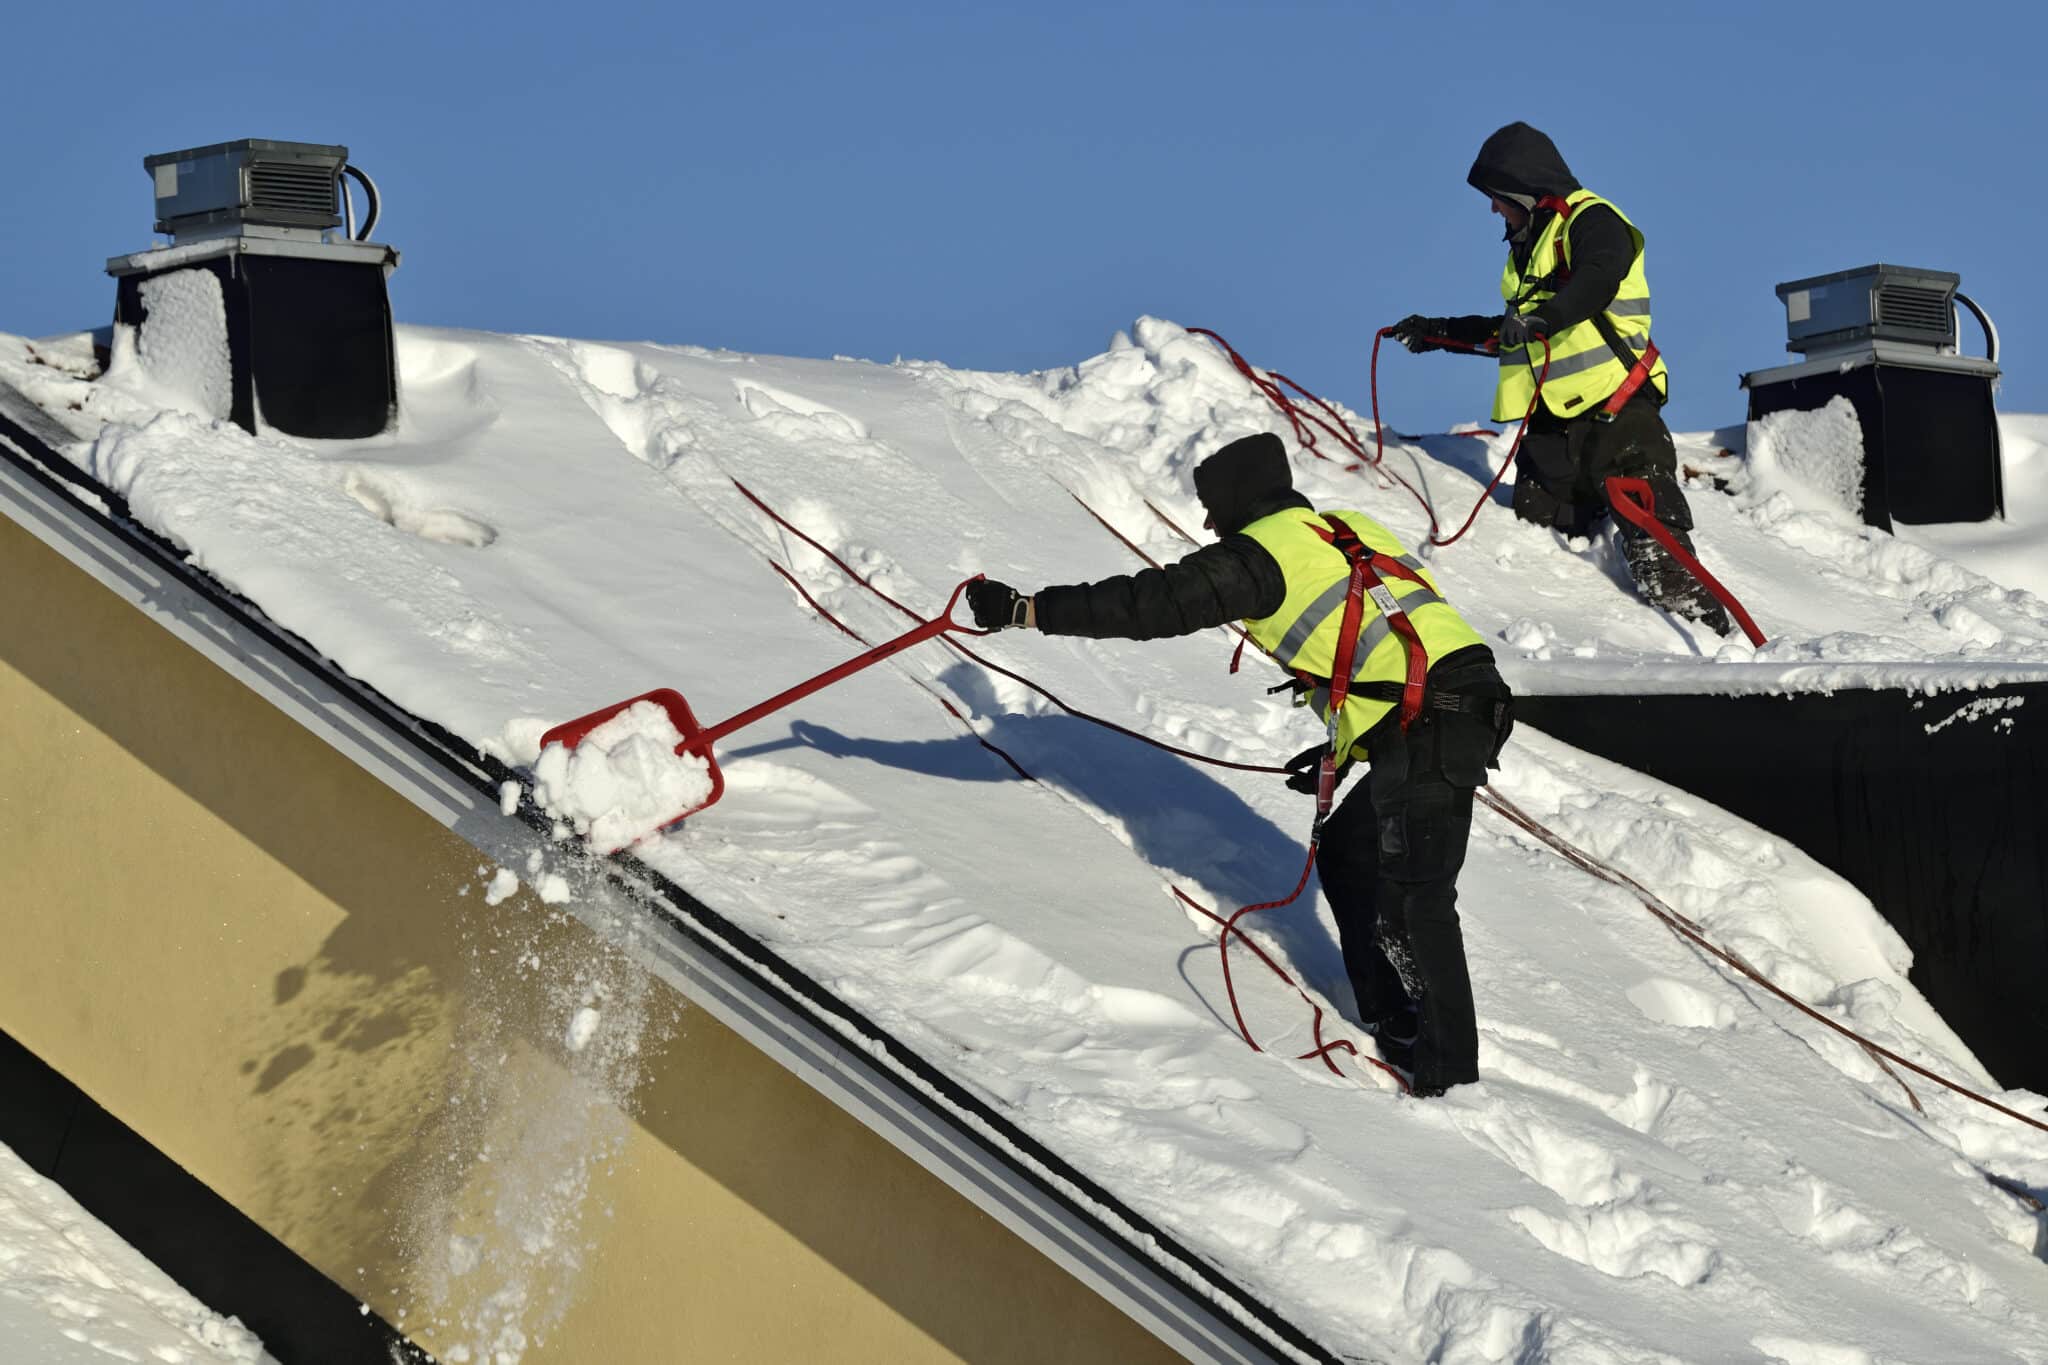 Workers with snow shovels carry out winter cleaning of roof of building from snow and ice